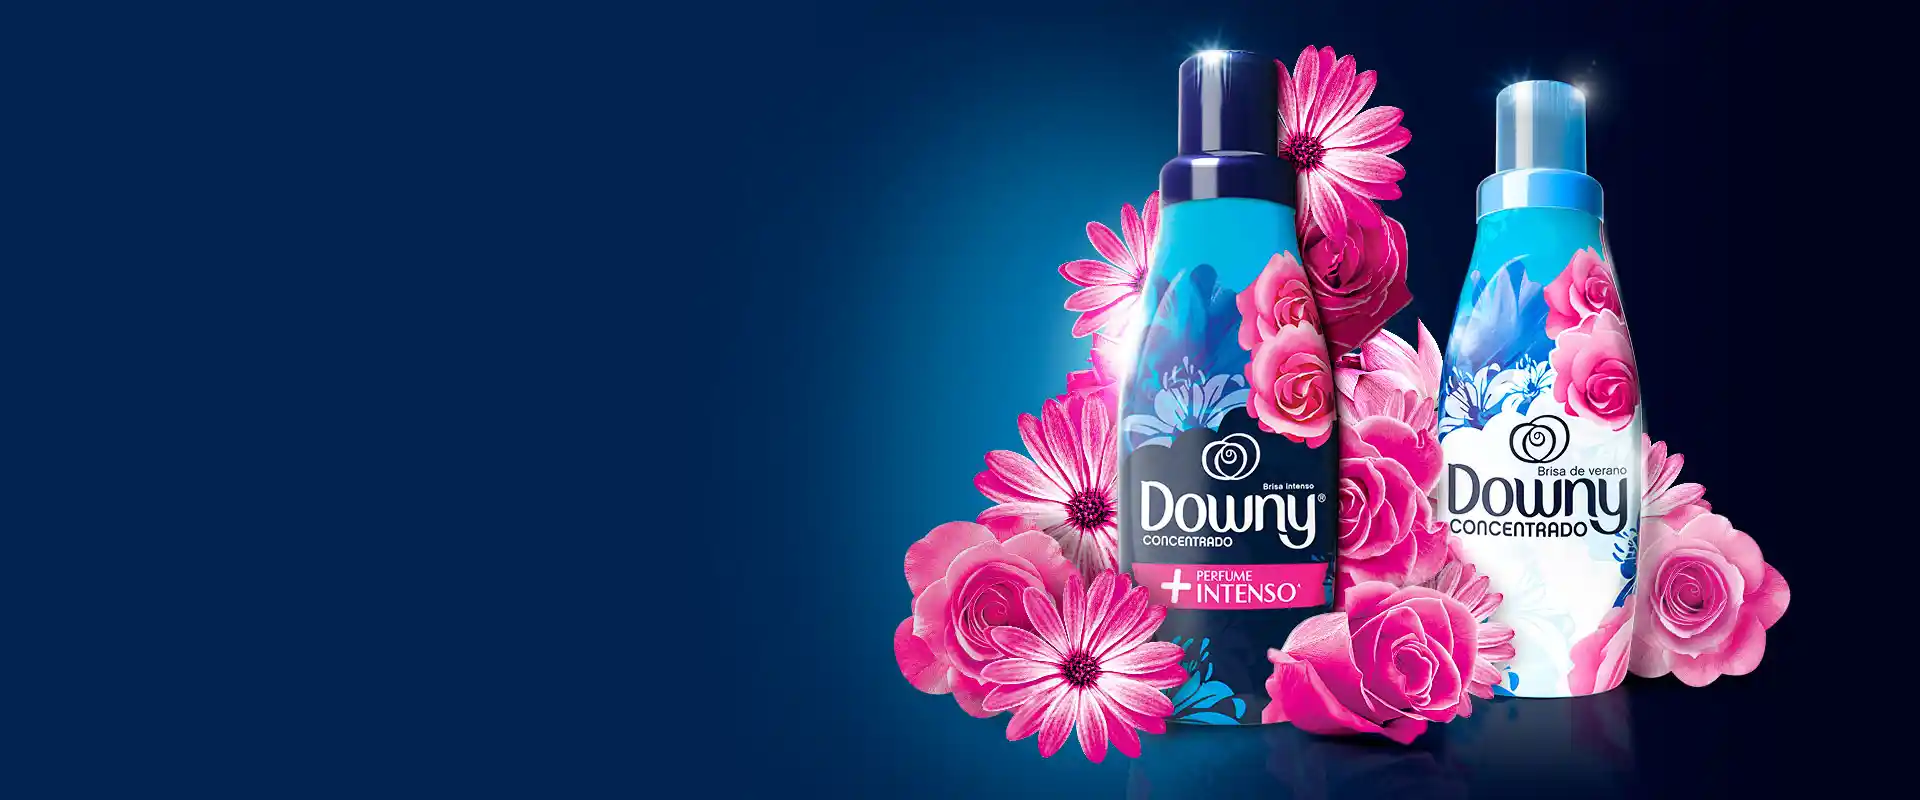 Downy Chile